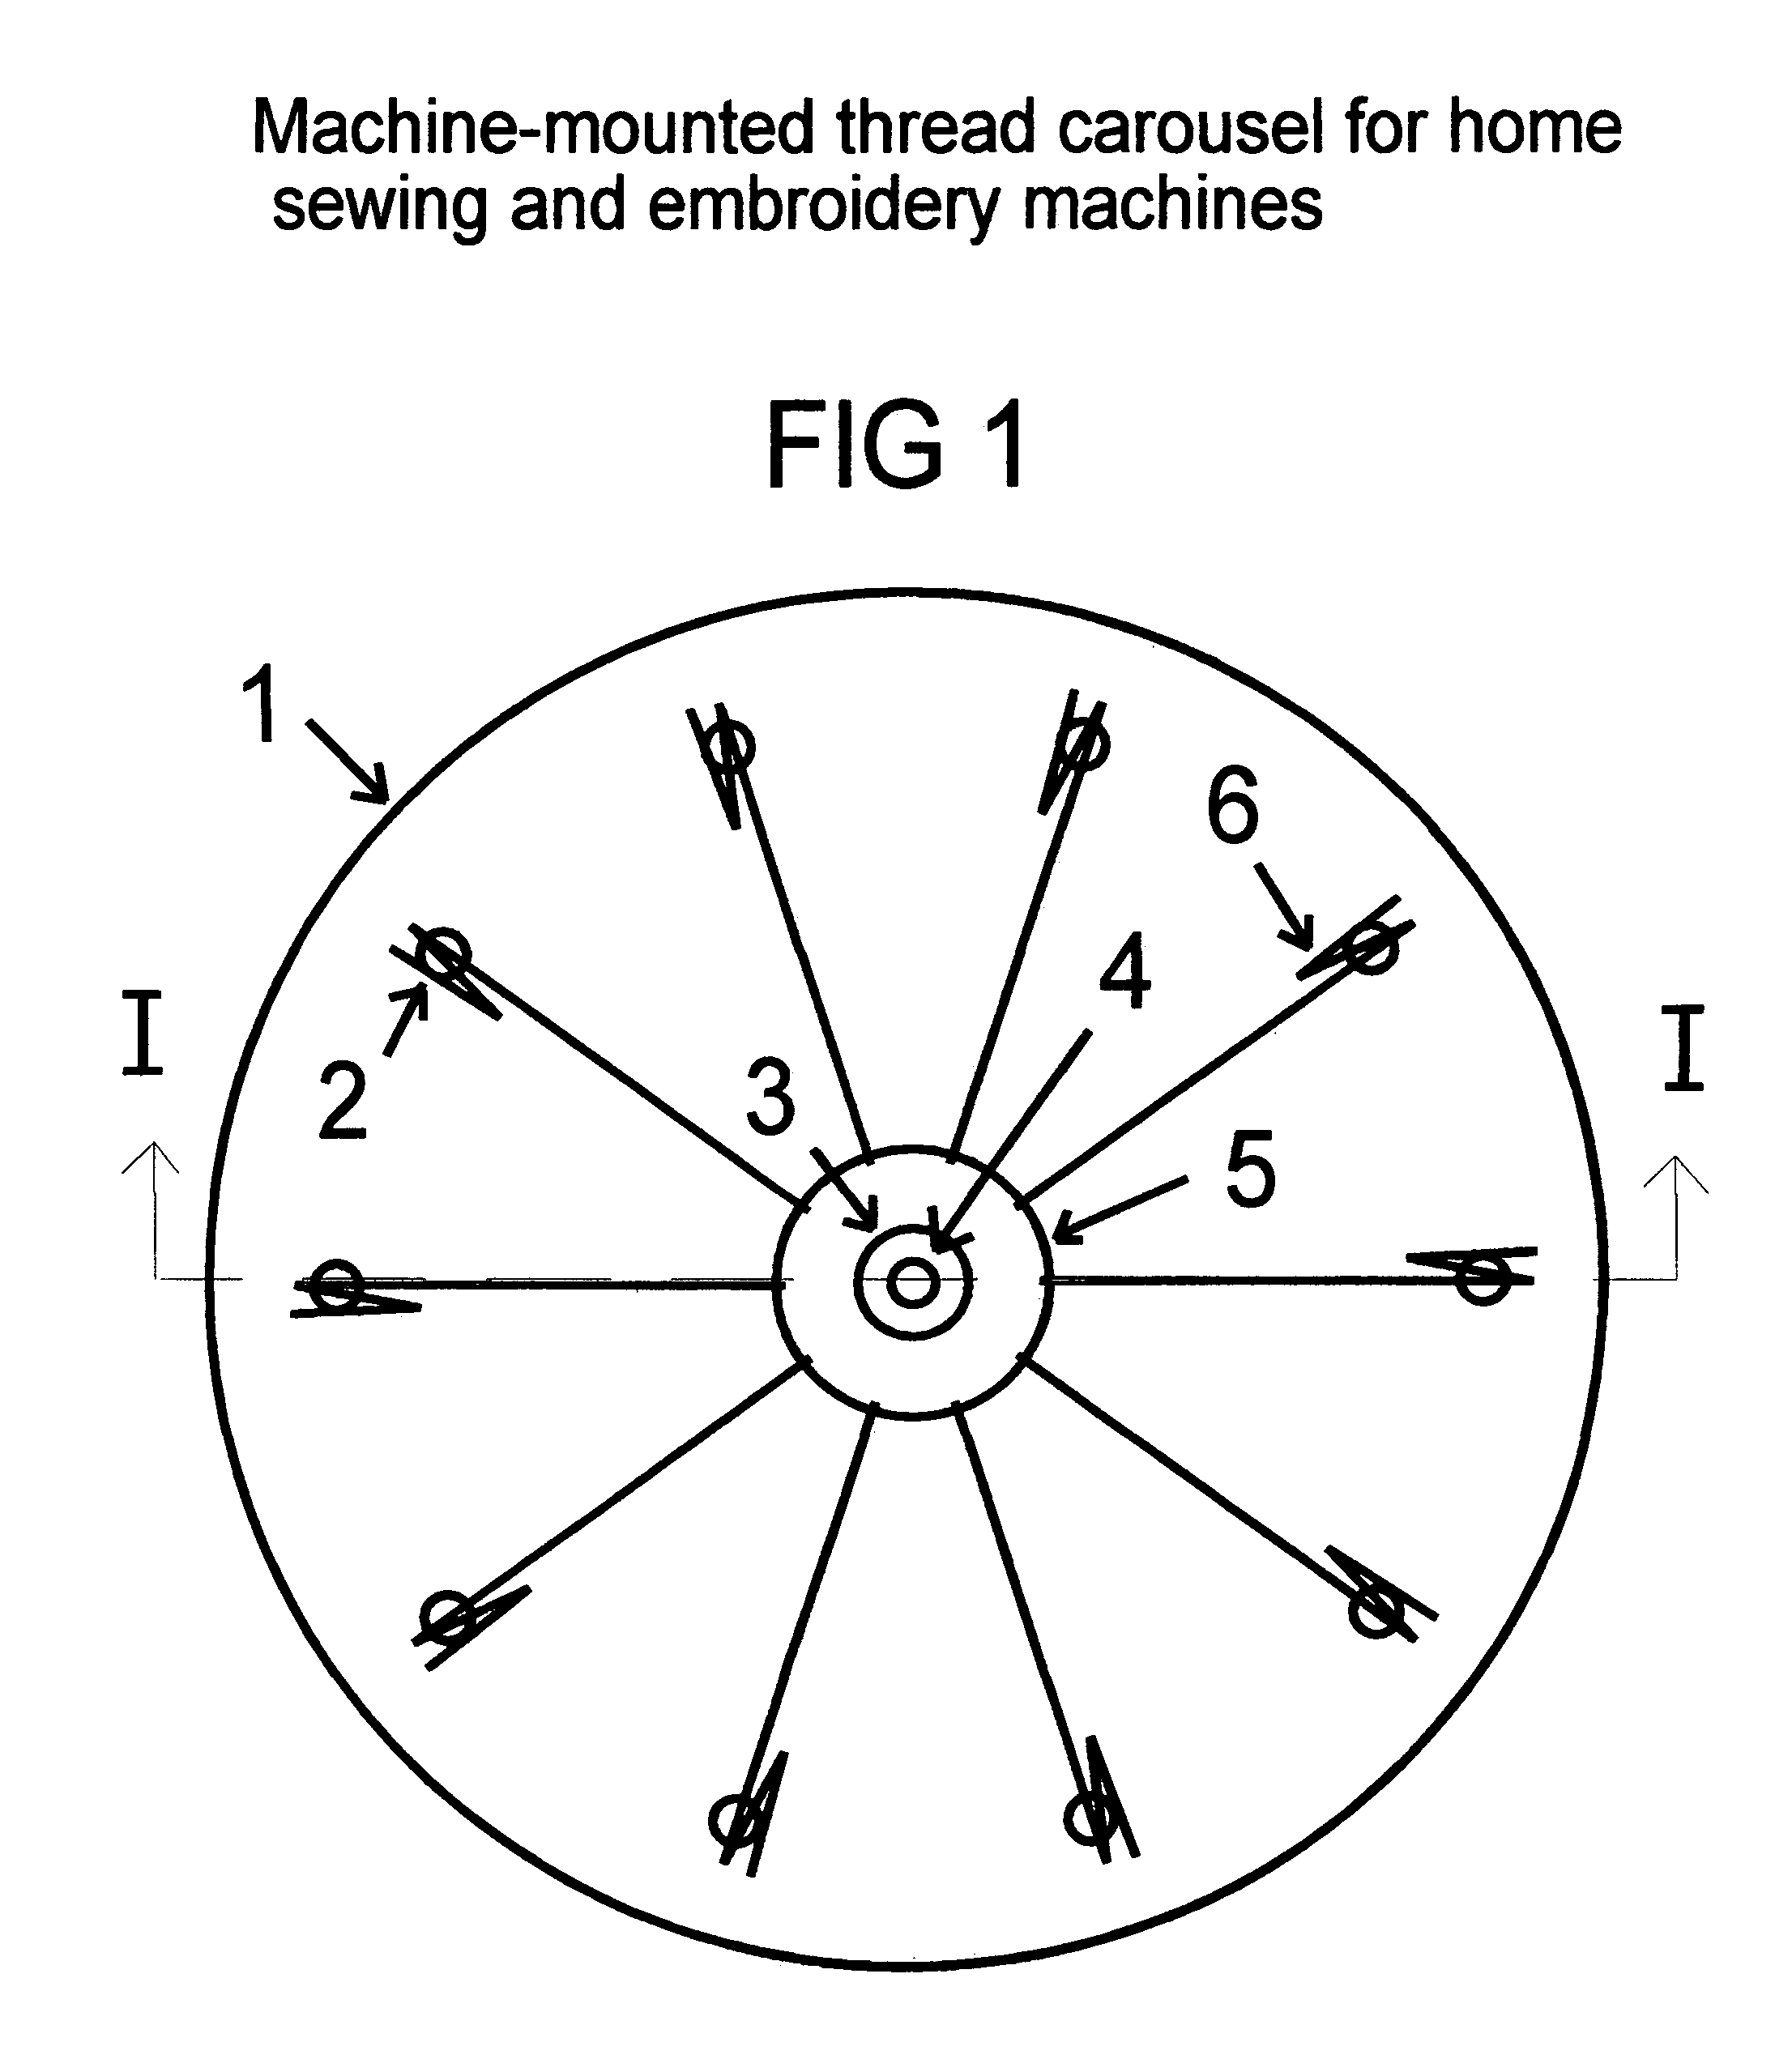 Machine-mounted thread carousel for home sewing and embroidery machines